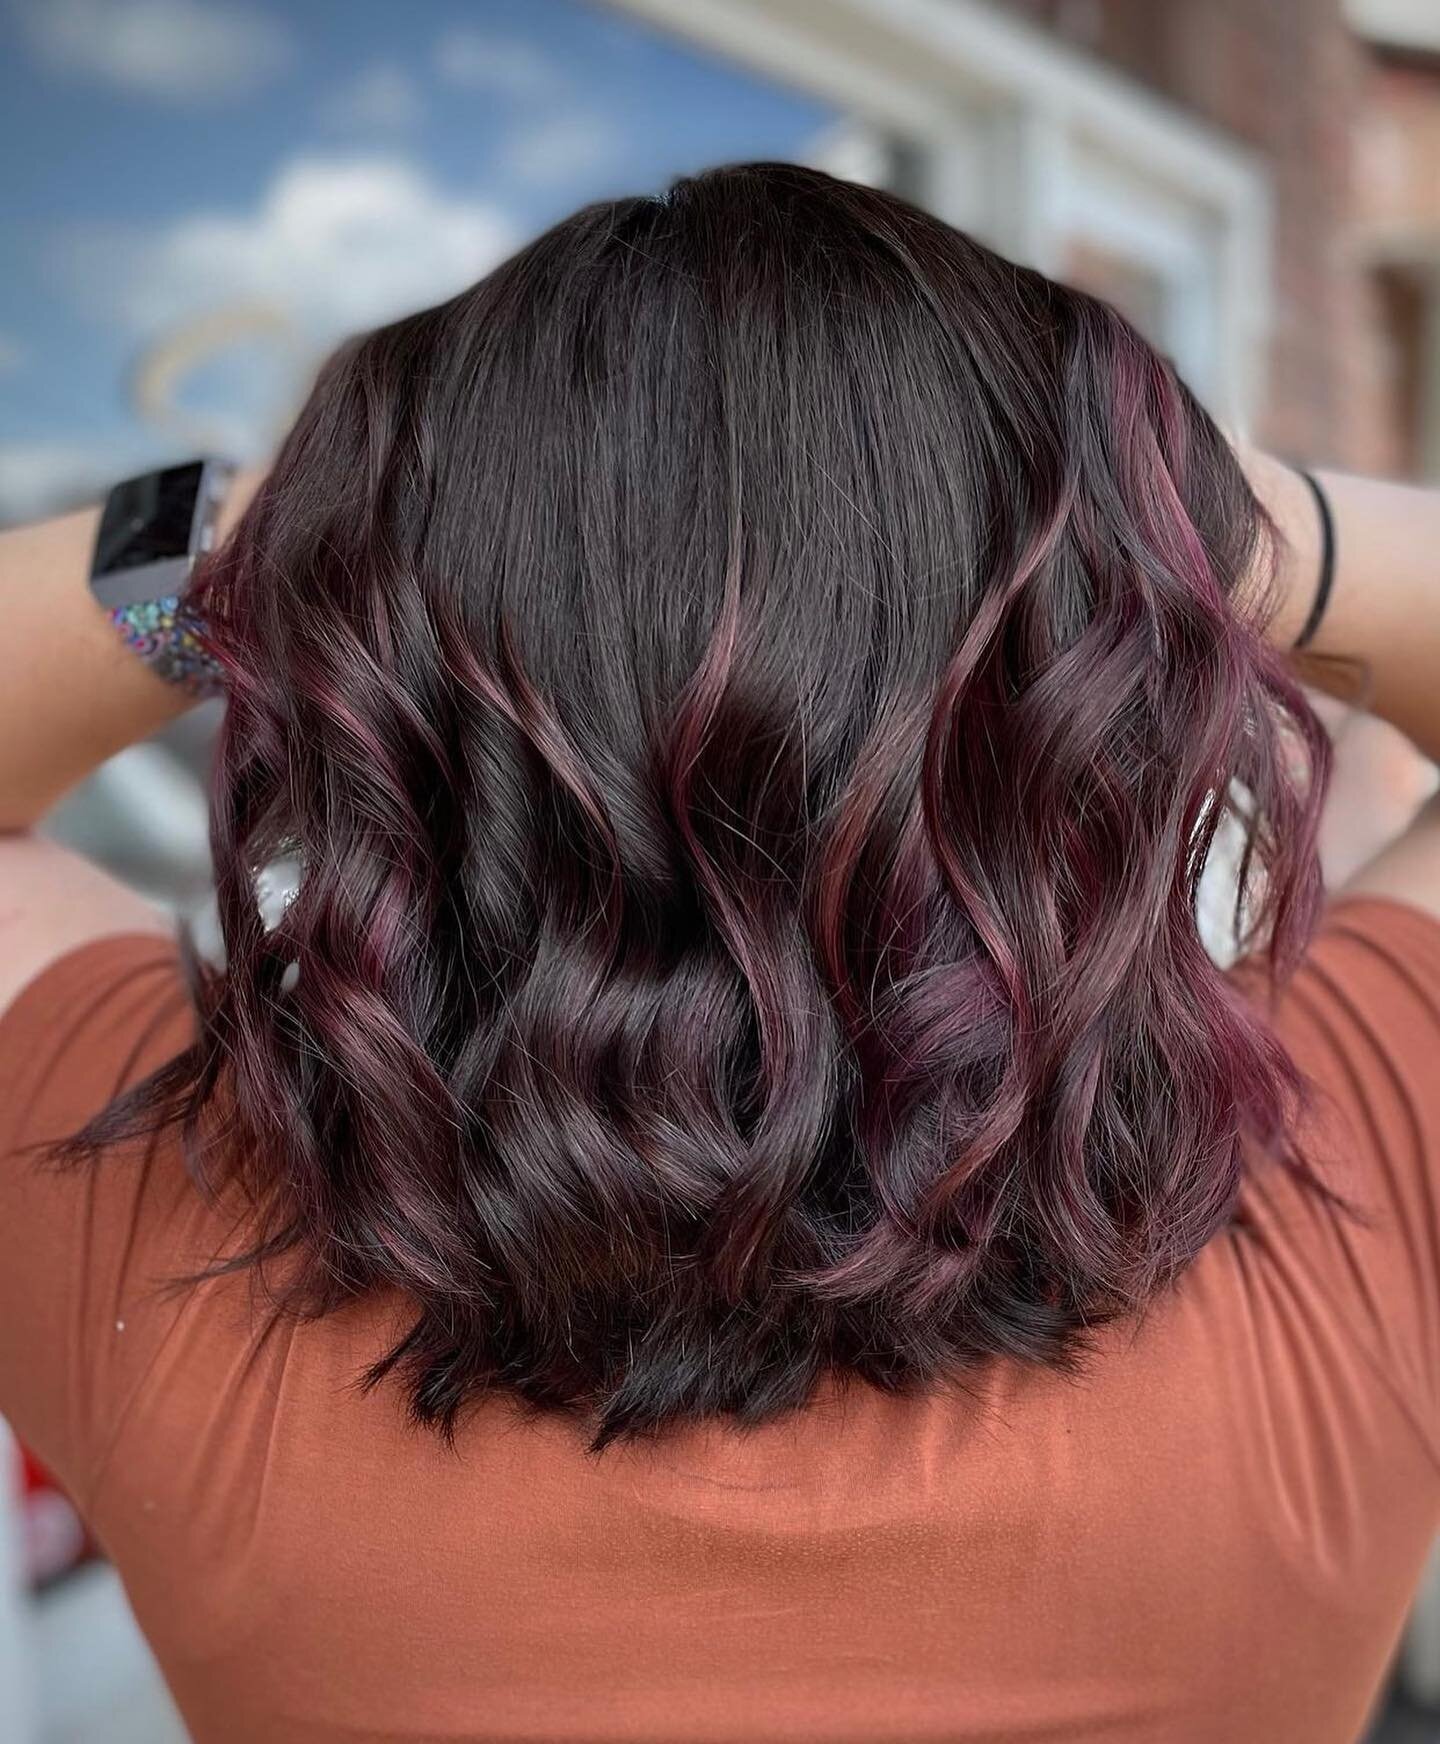 Fall is in the hAIR😉💜
&bull;
Color by @styled_by_kristenmarie 
&bull;
&bull;
&bull;
#hudsonvalleyny #hudsonvalleyroots #HVR #newyorksalon #hairstyles #hudsonvalleysalon #welovehair #behindthechair #cutandcolor #wellacolorist #wella #hairartist #hai